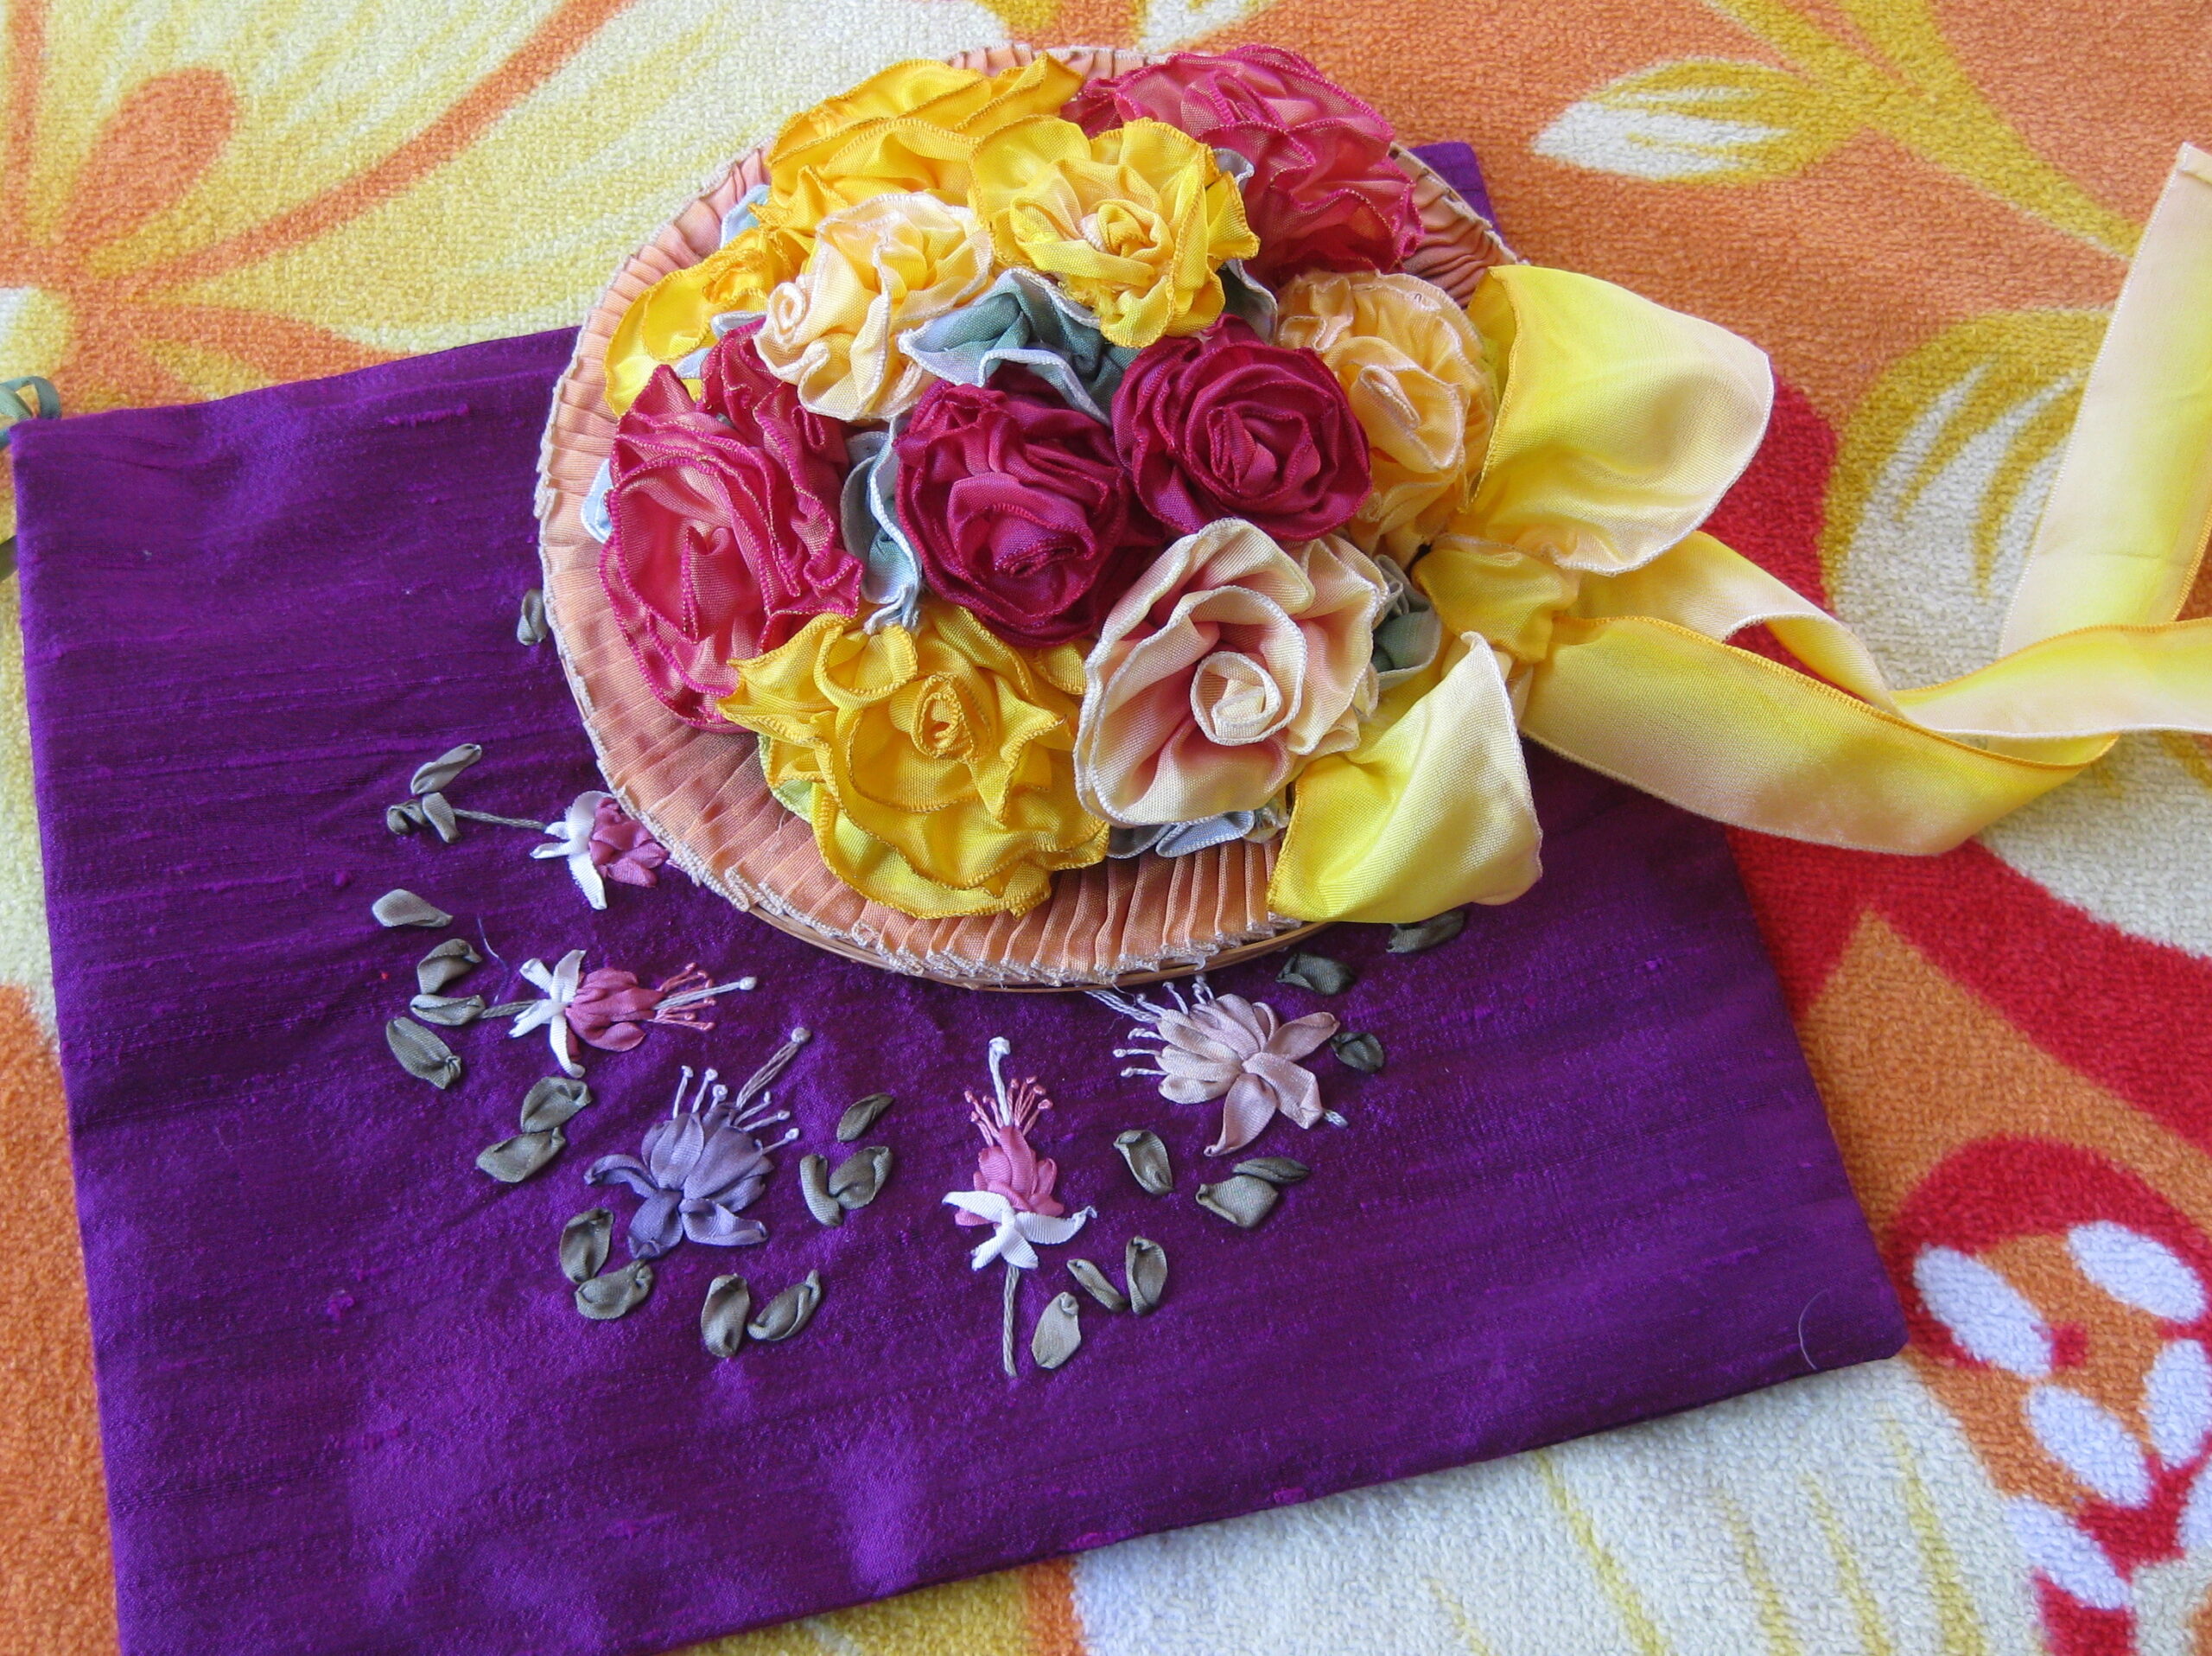 A doll hat covered in wired ribbon roses rests on a purple silk pouch embroidered with silk ribbon flowers